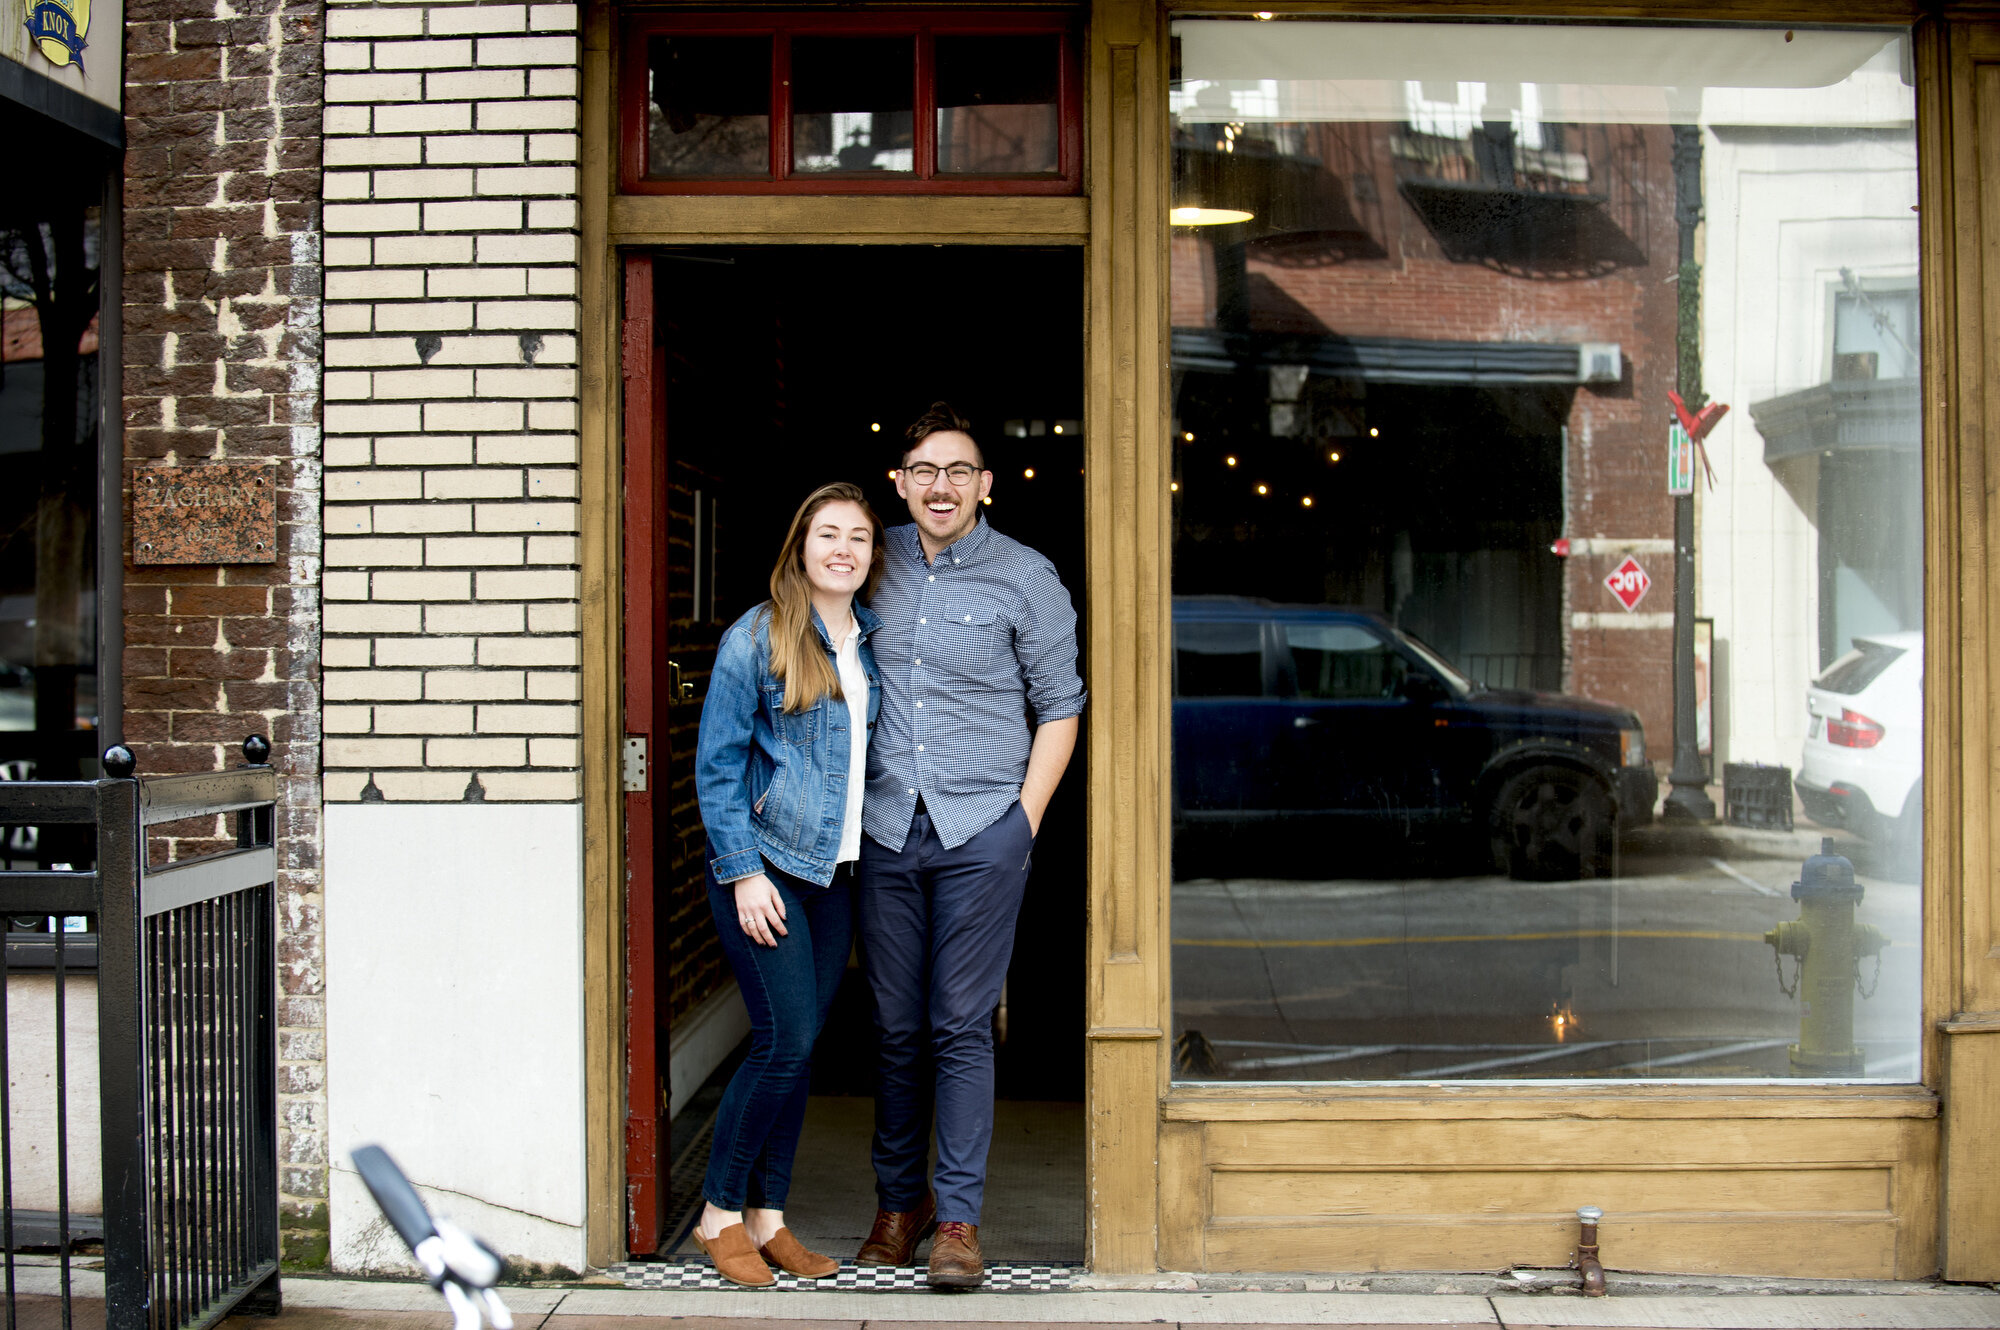  Katherine and Logan Higgins pose for a photo in front of their future Jacks of Knoxville shop at 133c South Gay Street in Knoxville. The shop will have a strong focus on selling arts and crafts made by local makers. 